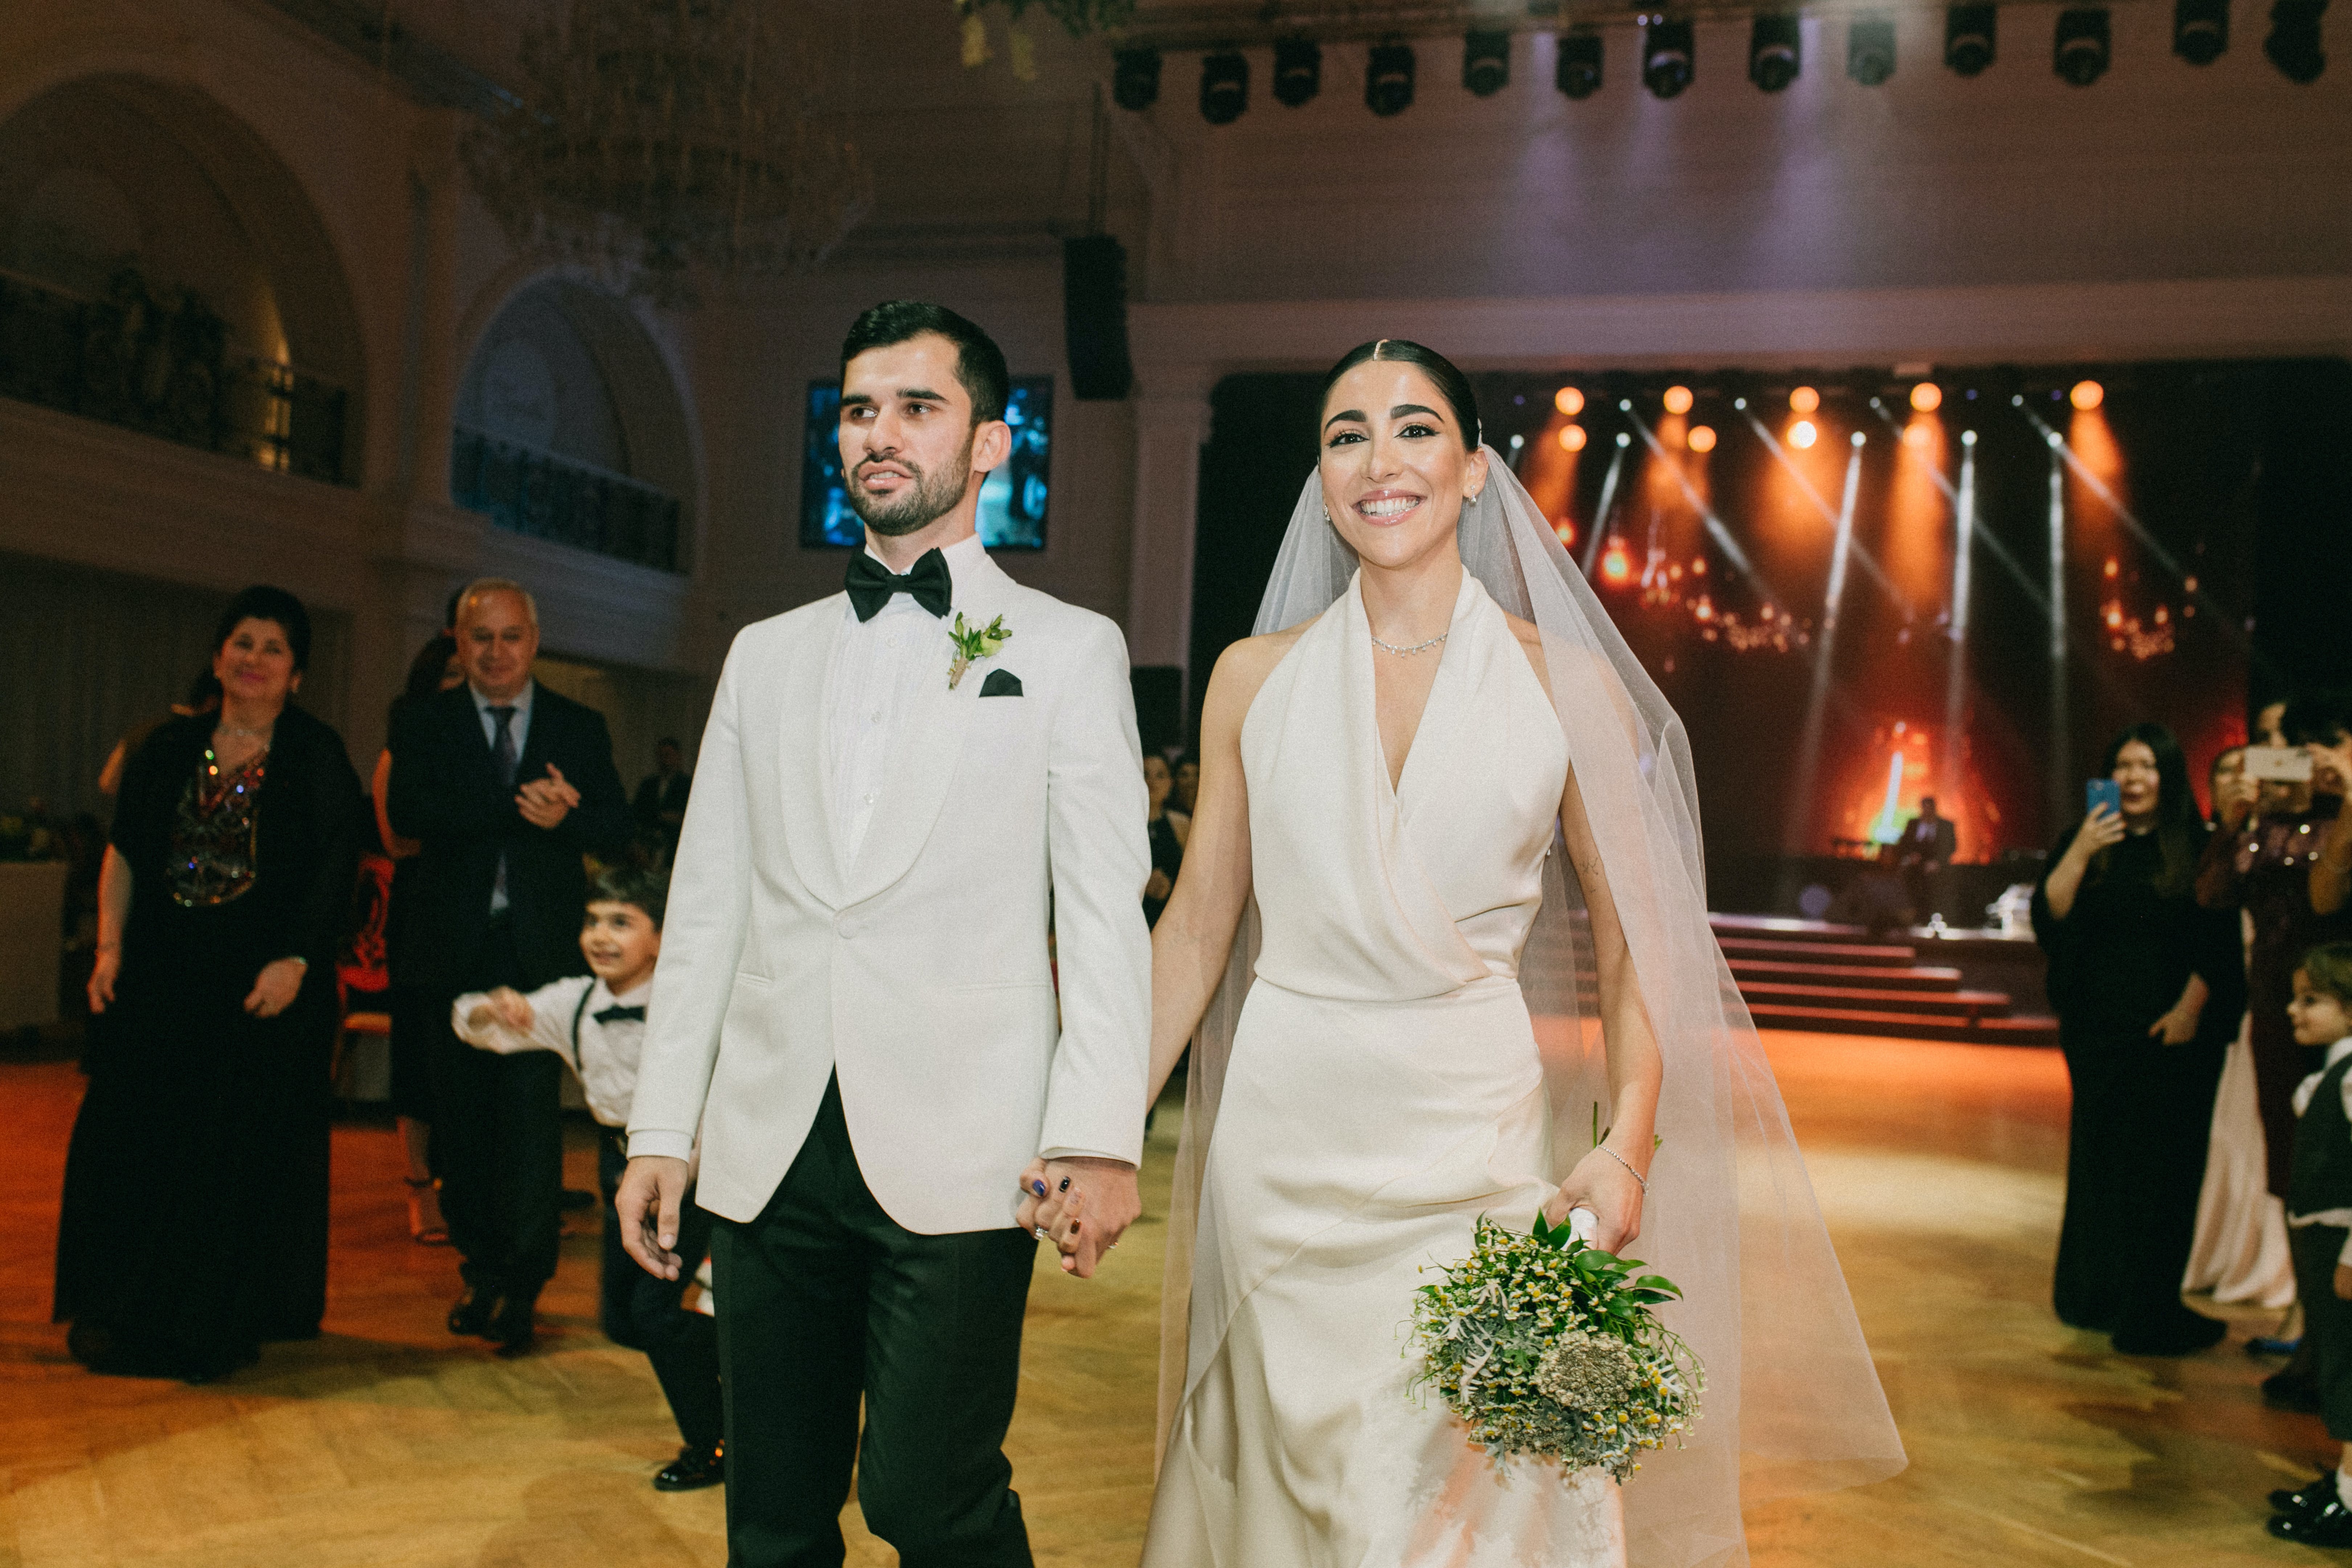 The groom and bride walking hand in hand at wedding venue | Source: Pexels